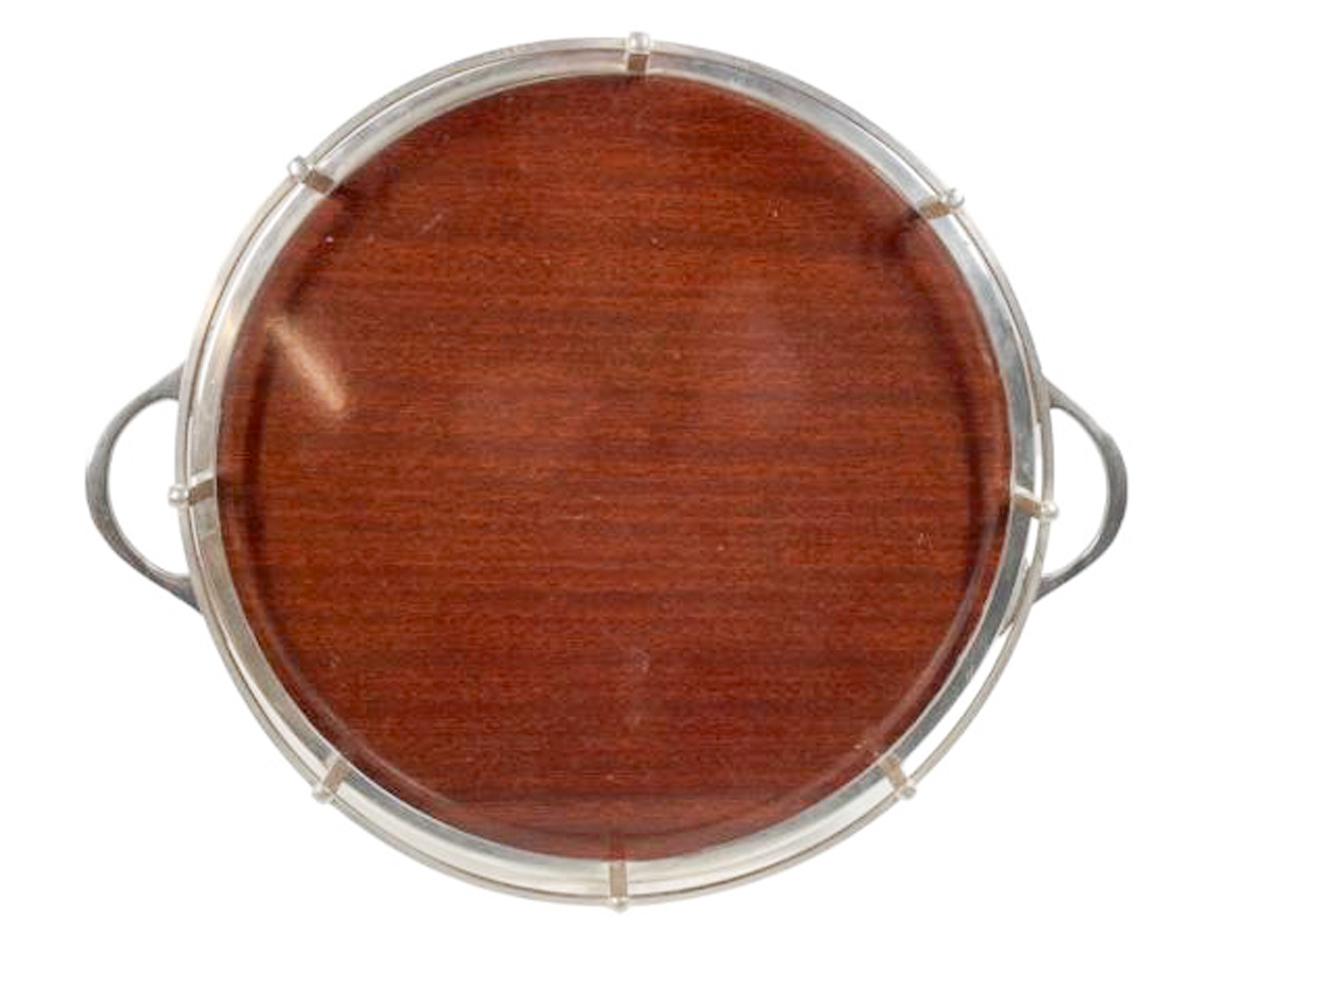 Vintage circular silver plate galleried serving tray with handles and four square legs. The tray surface made of Formica with wood grain surface and provided to Crescent Silver for use in tray surfaces as it was said to be heat, alcohol and water